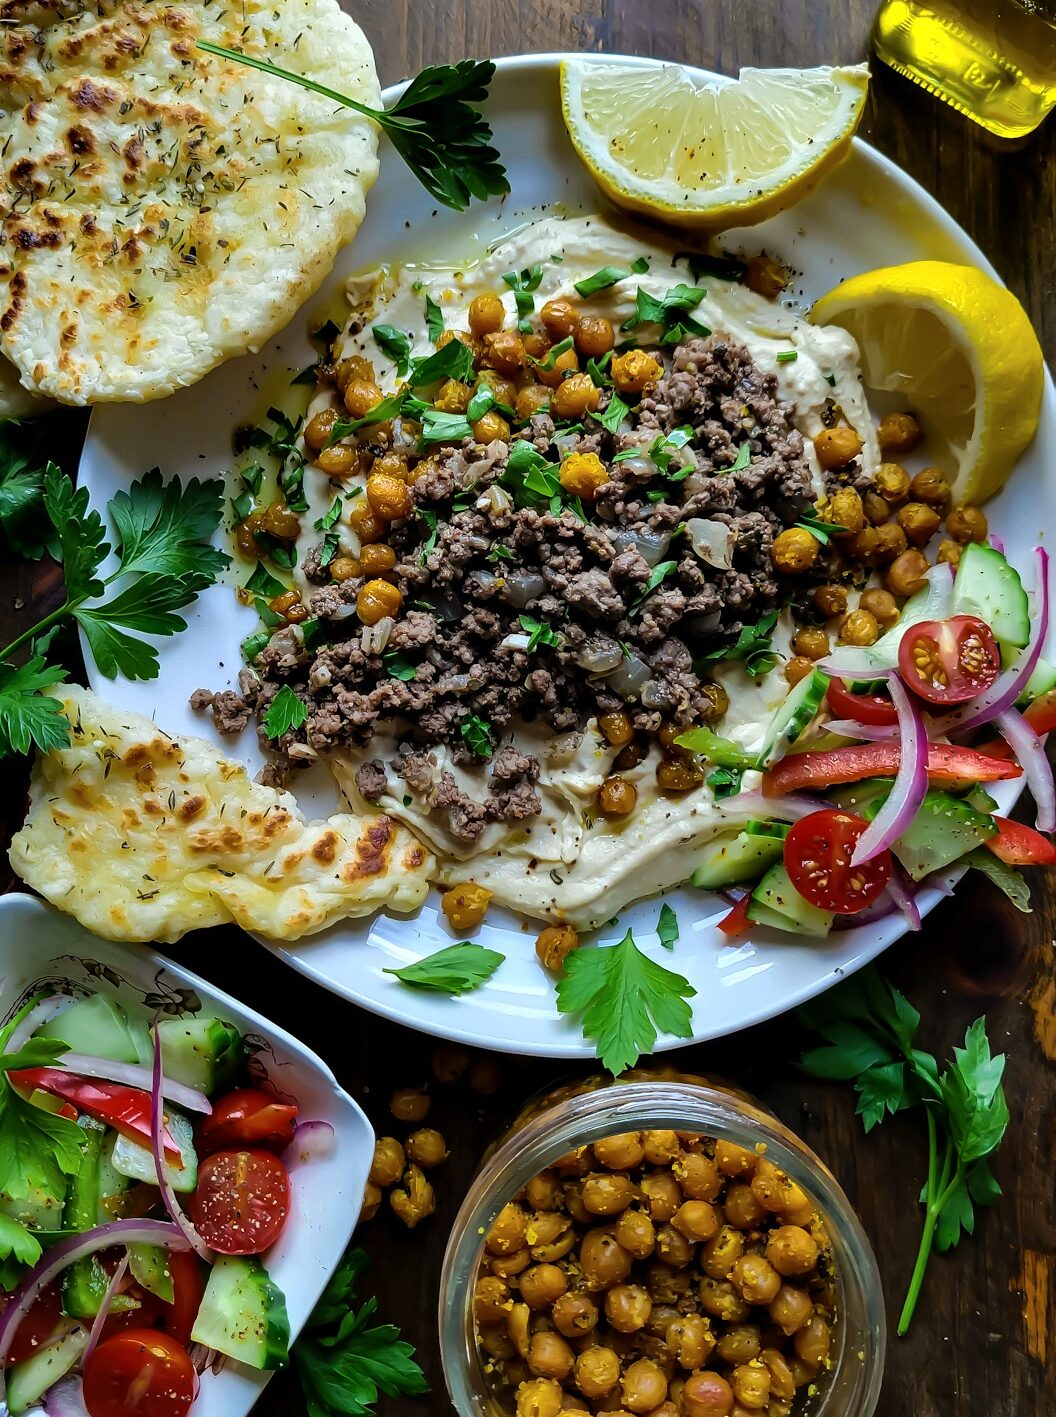 A platter filled with hummus, spiced beef and topped with Dukka Roasted Chickpeas. Flatbread and Greek salad are to the side.